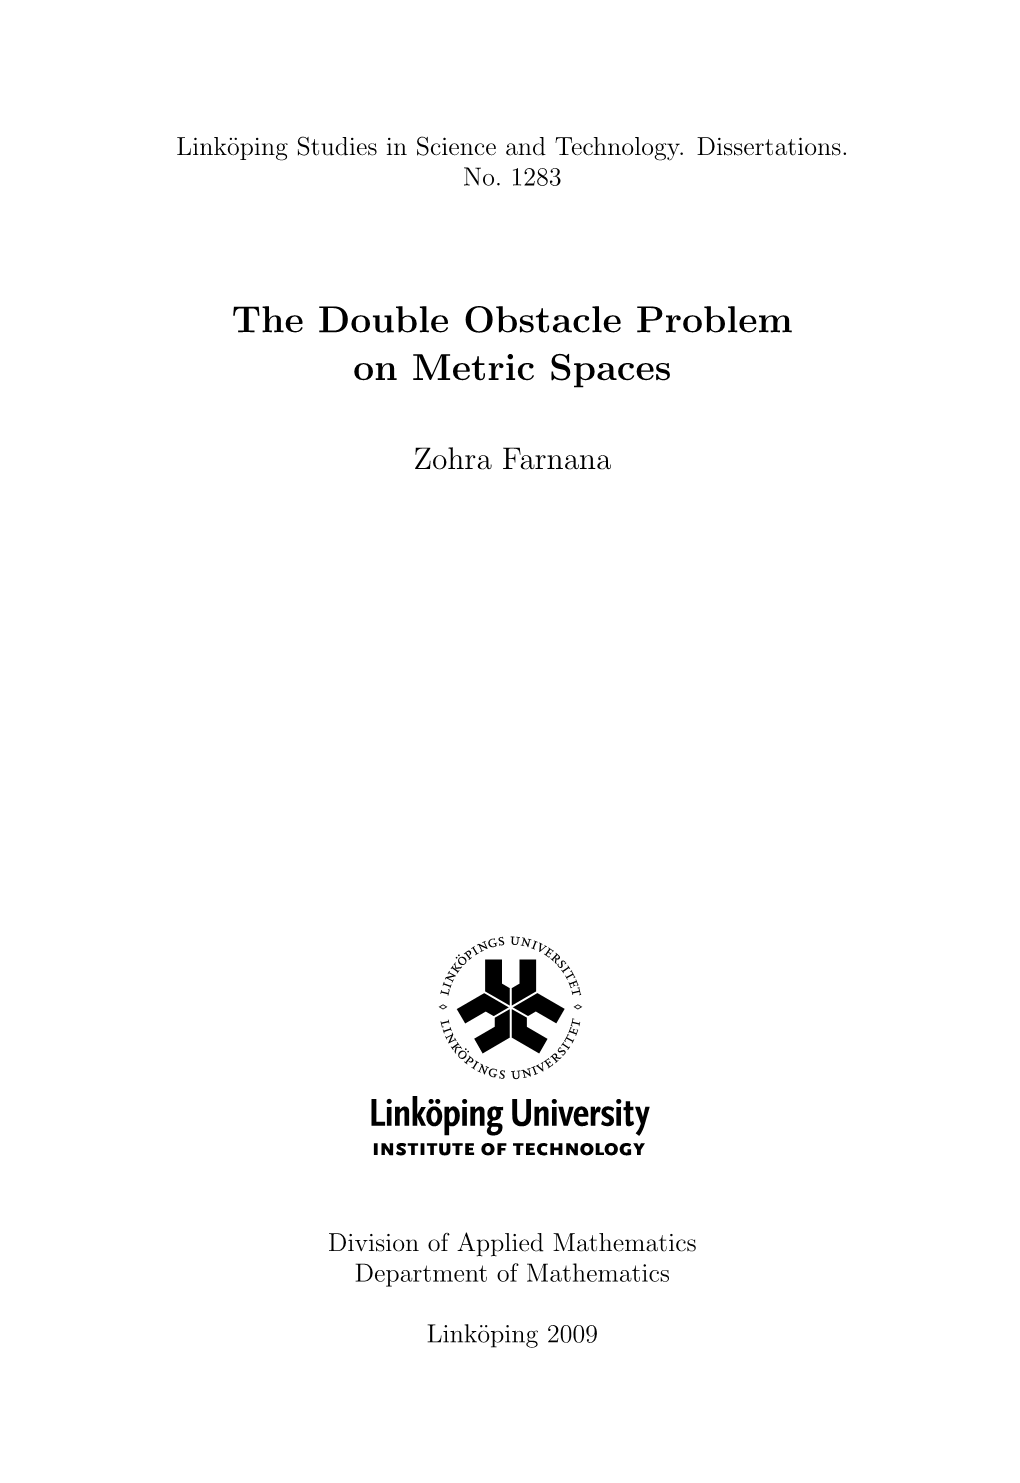 The Double Obstacle Problem on Metric Spaces